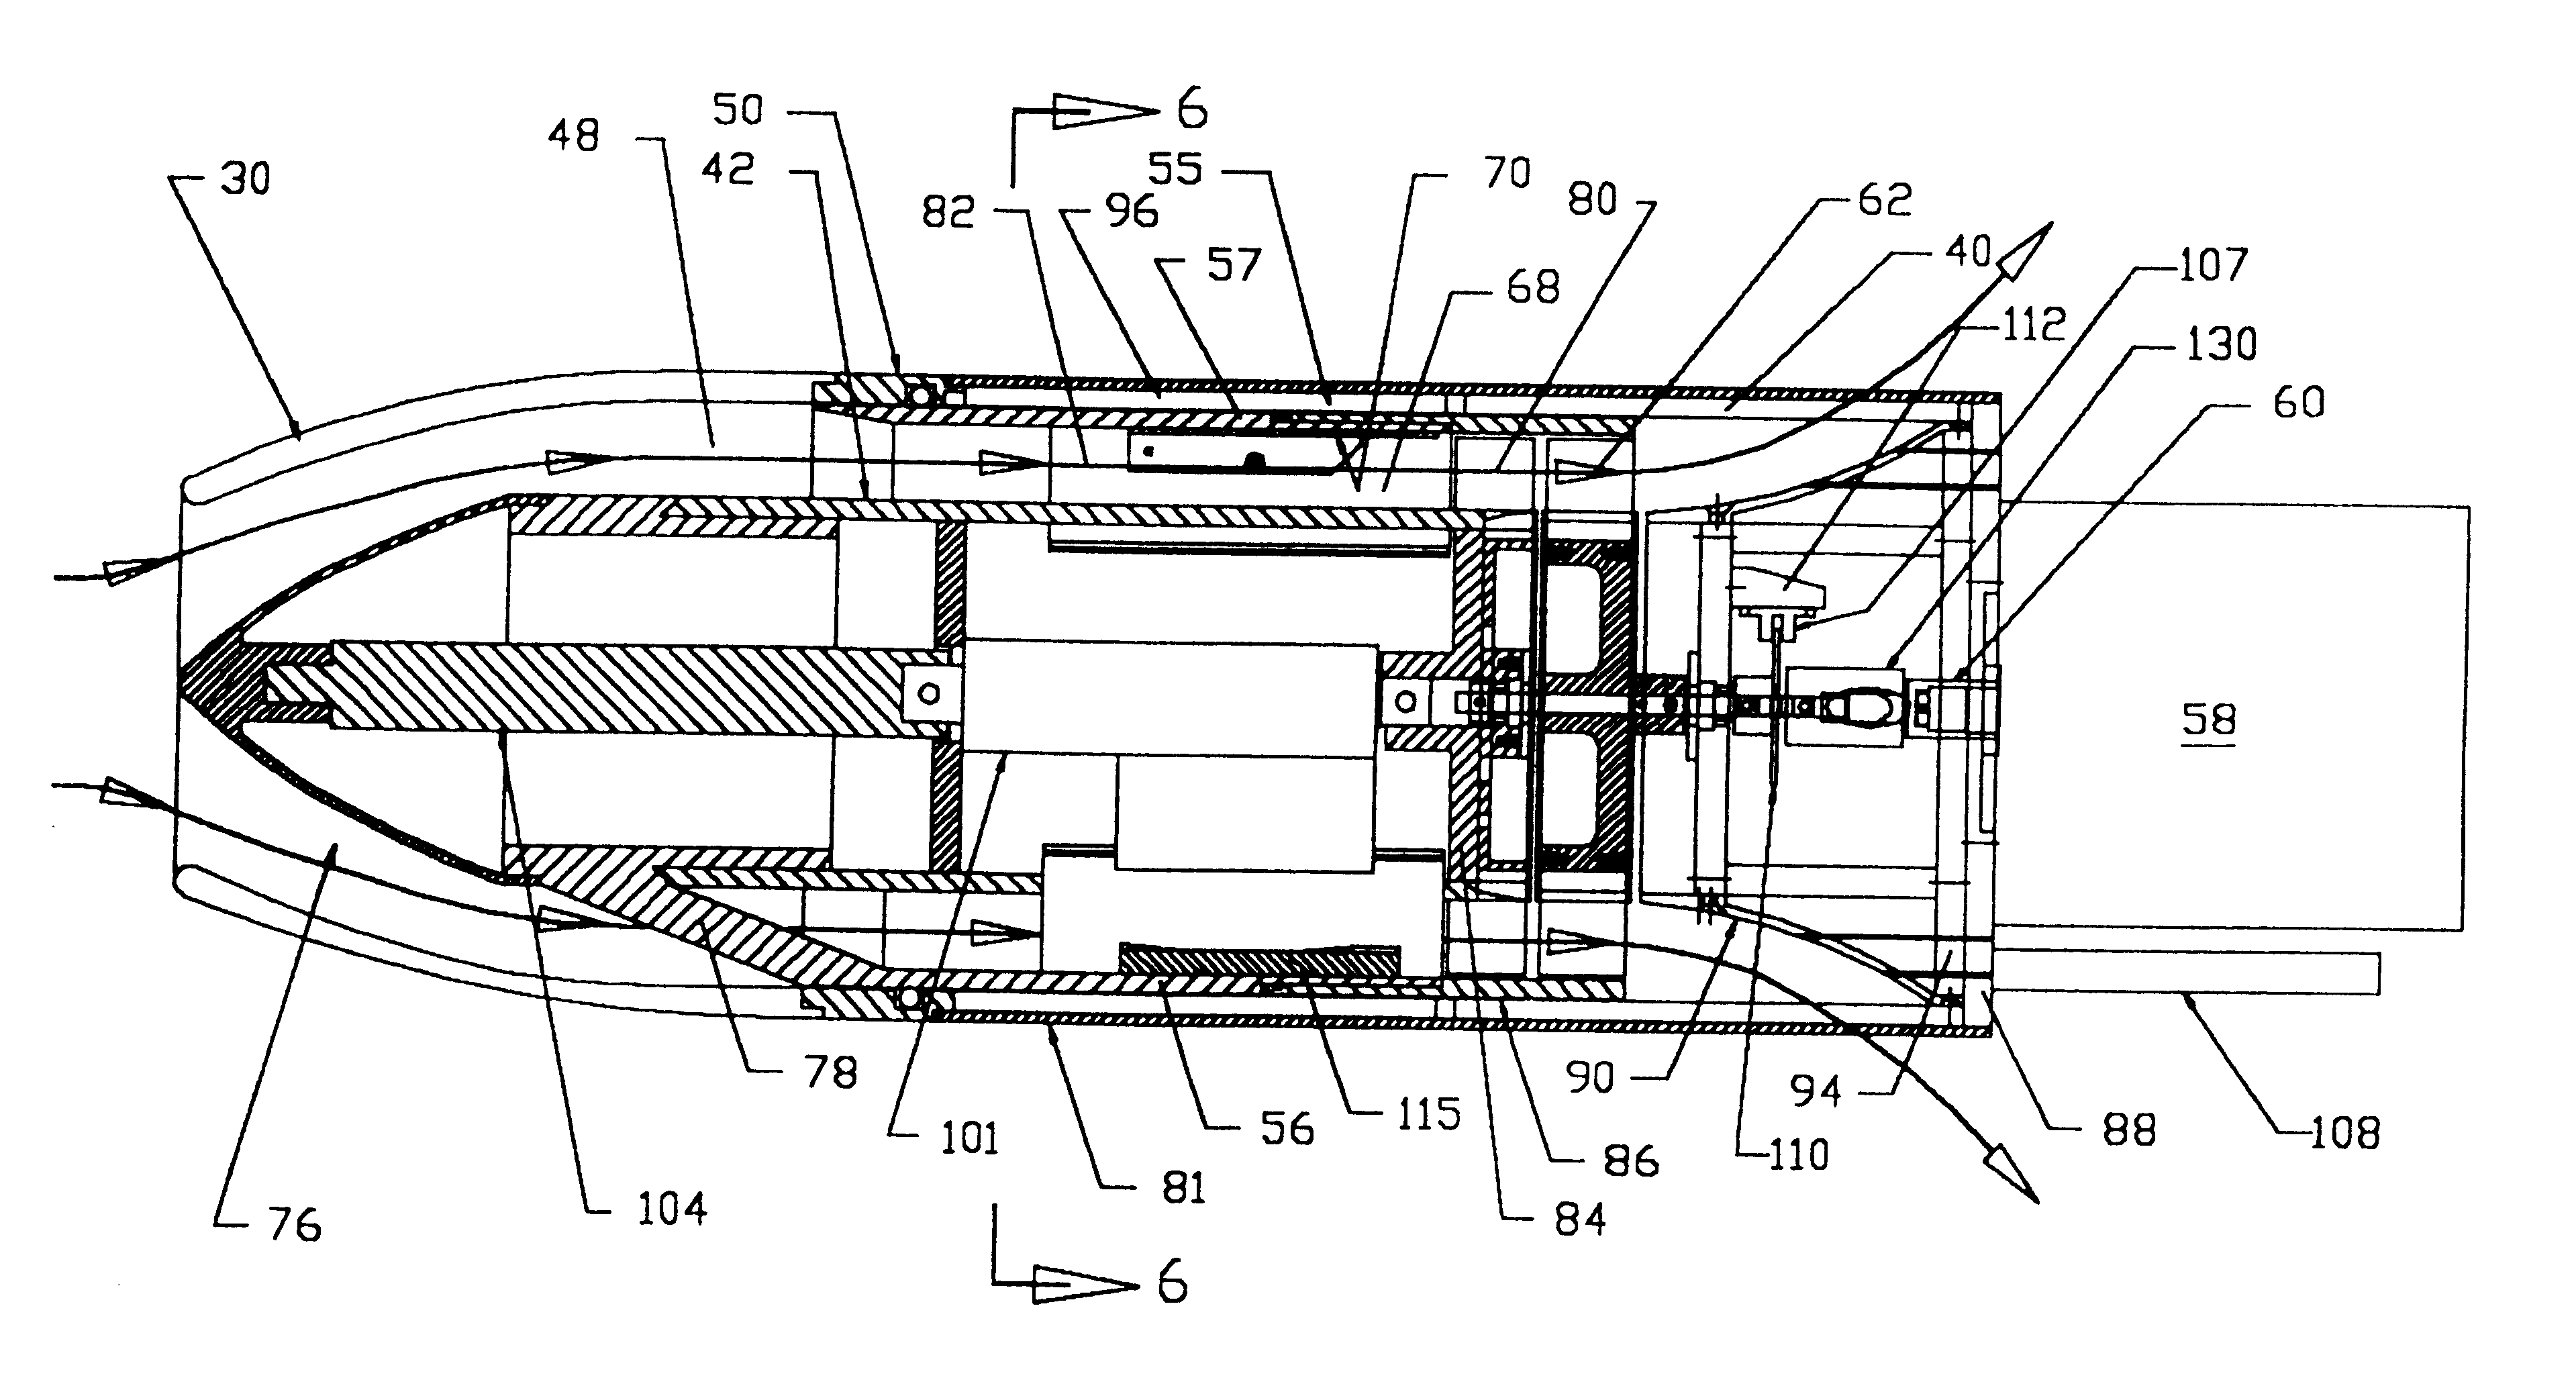 Low drag ducted Ram air turbine generator and cooling system